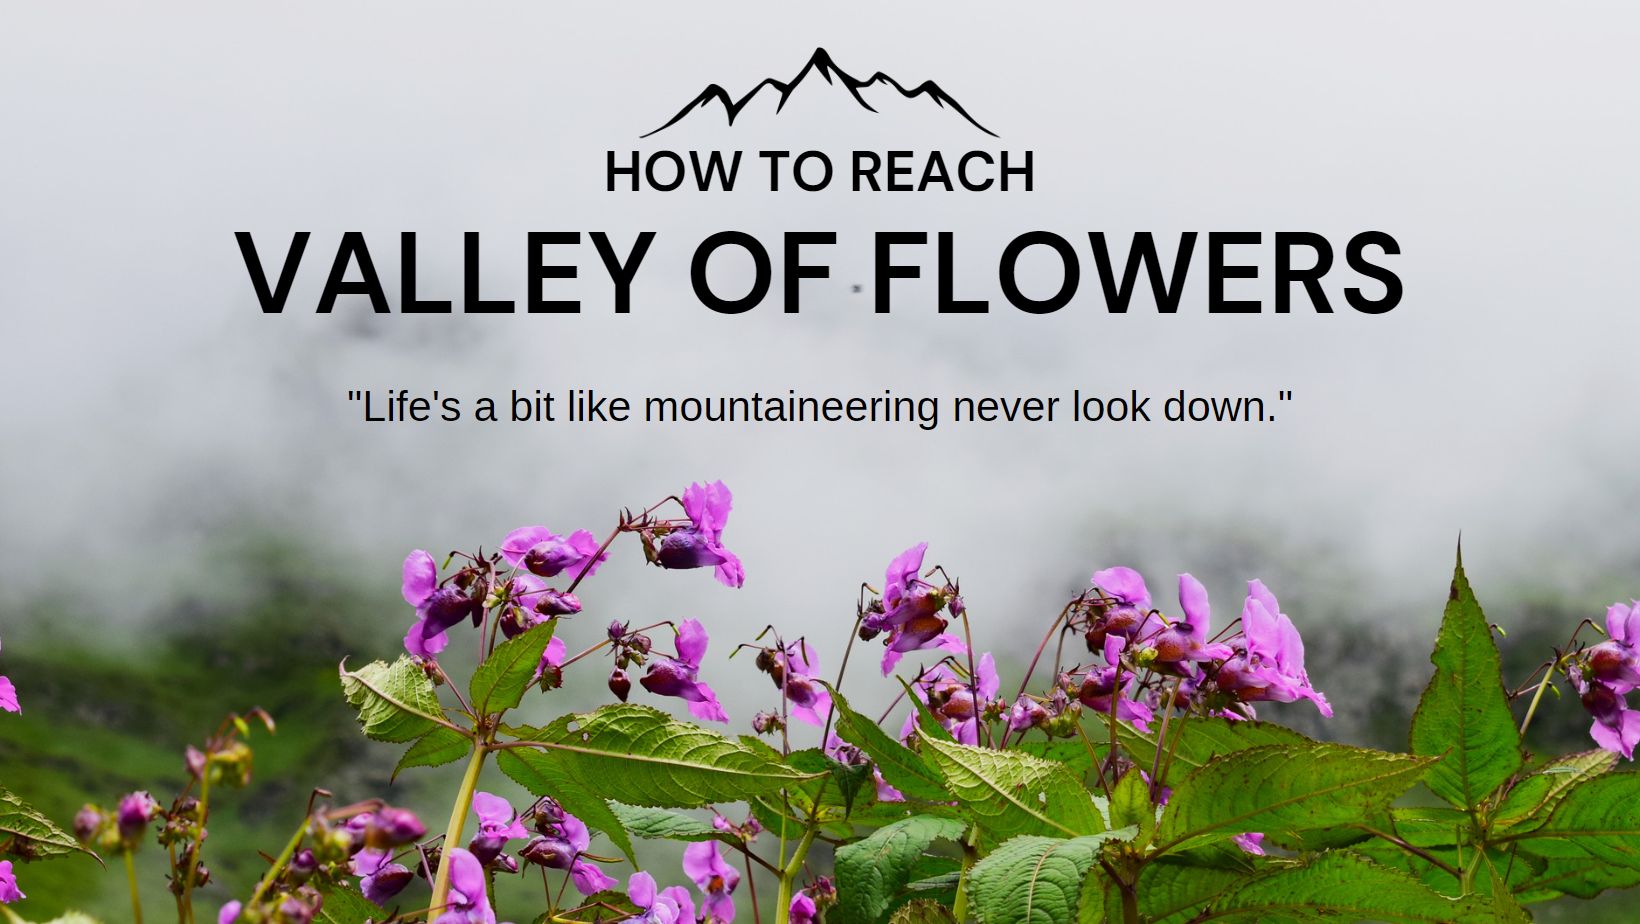 How to reach valley of flowers